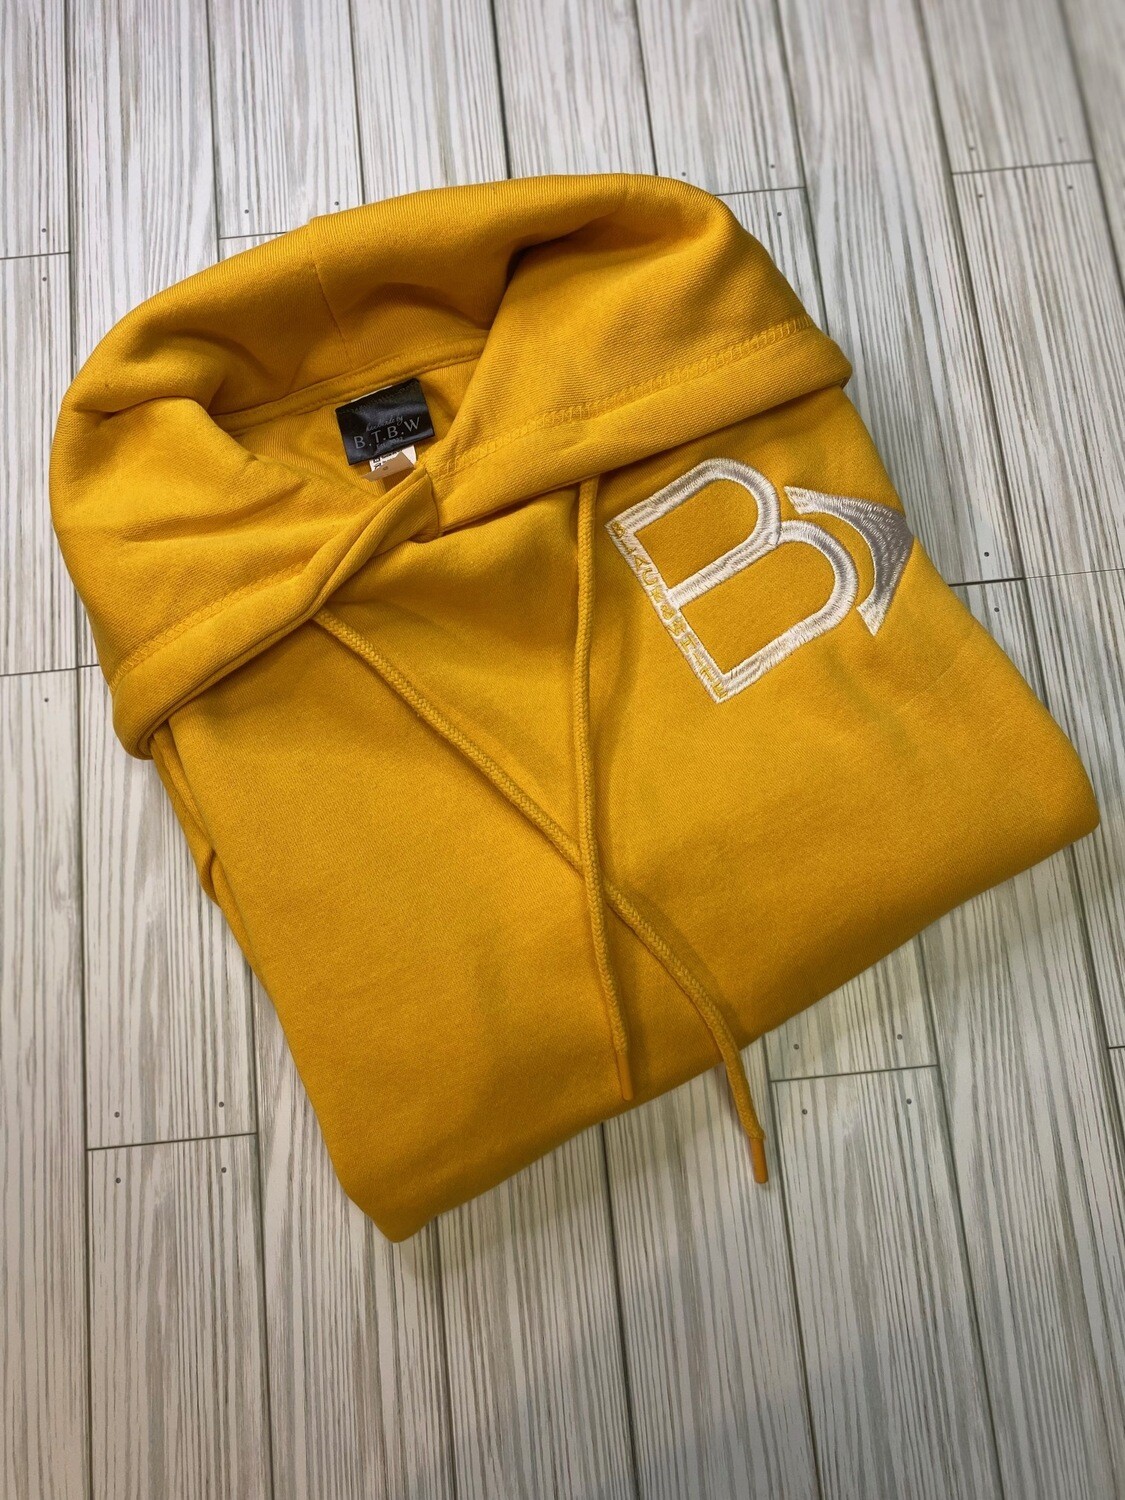 BTBW Hoodie-(Gold) (Made to order), Size: Small